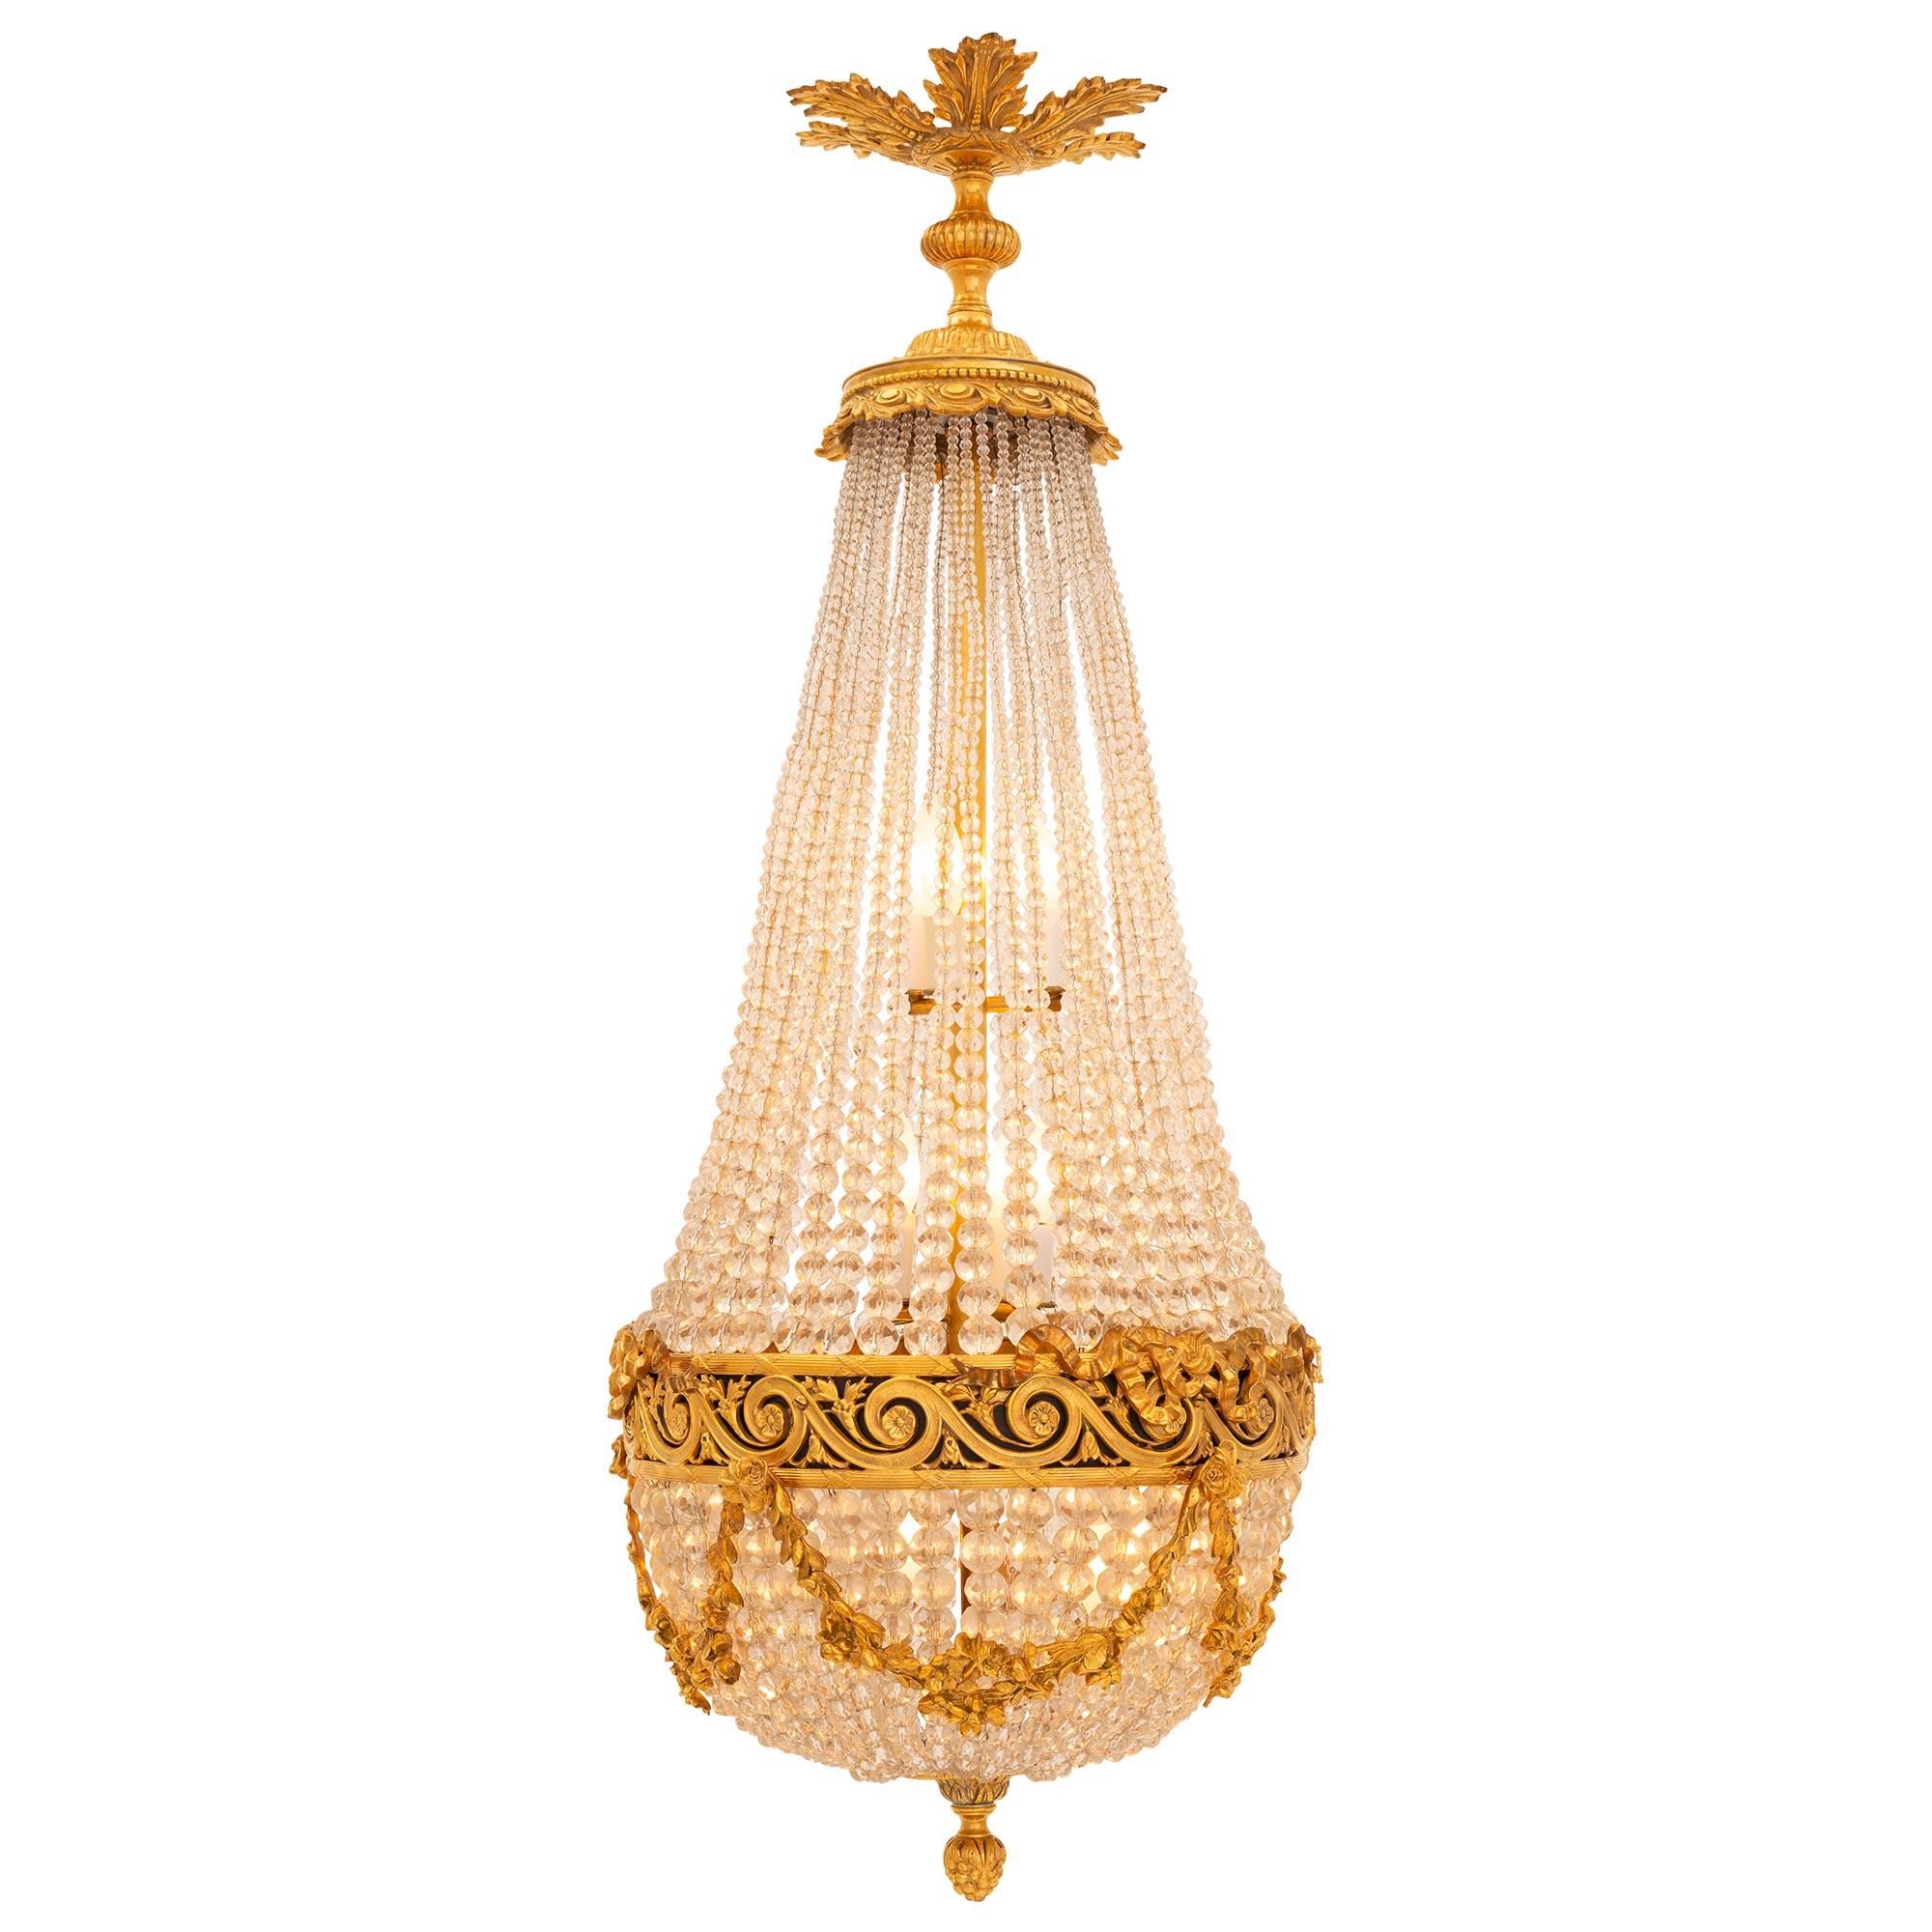 A beautiful and high quality French 19th century Louis XVI st. ormolu, patinated bronze, and crystal chandelier. The eleven light montgolfier shaped chandelier is centered by a richly chased bottom berried foliate finial below a fine circular